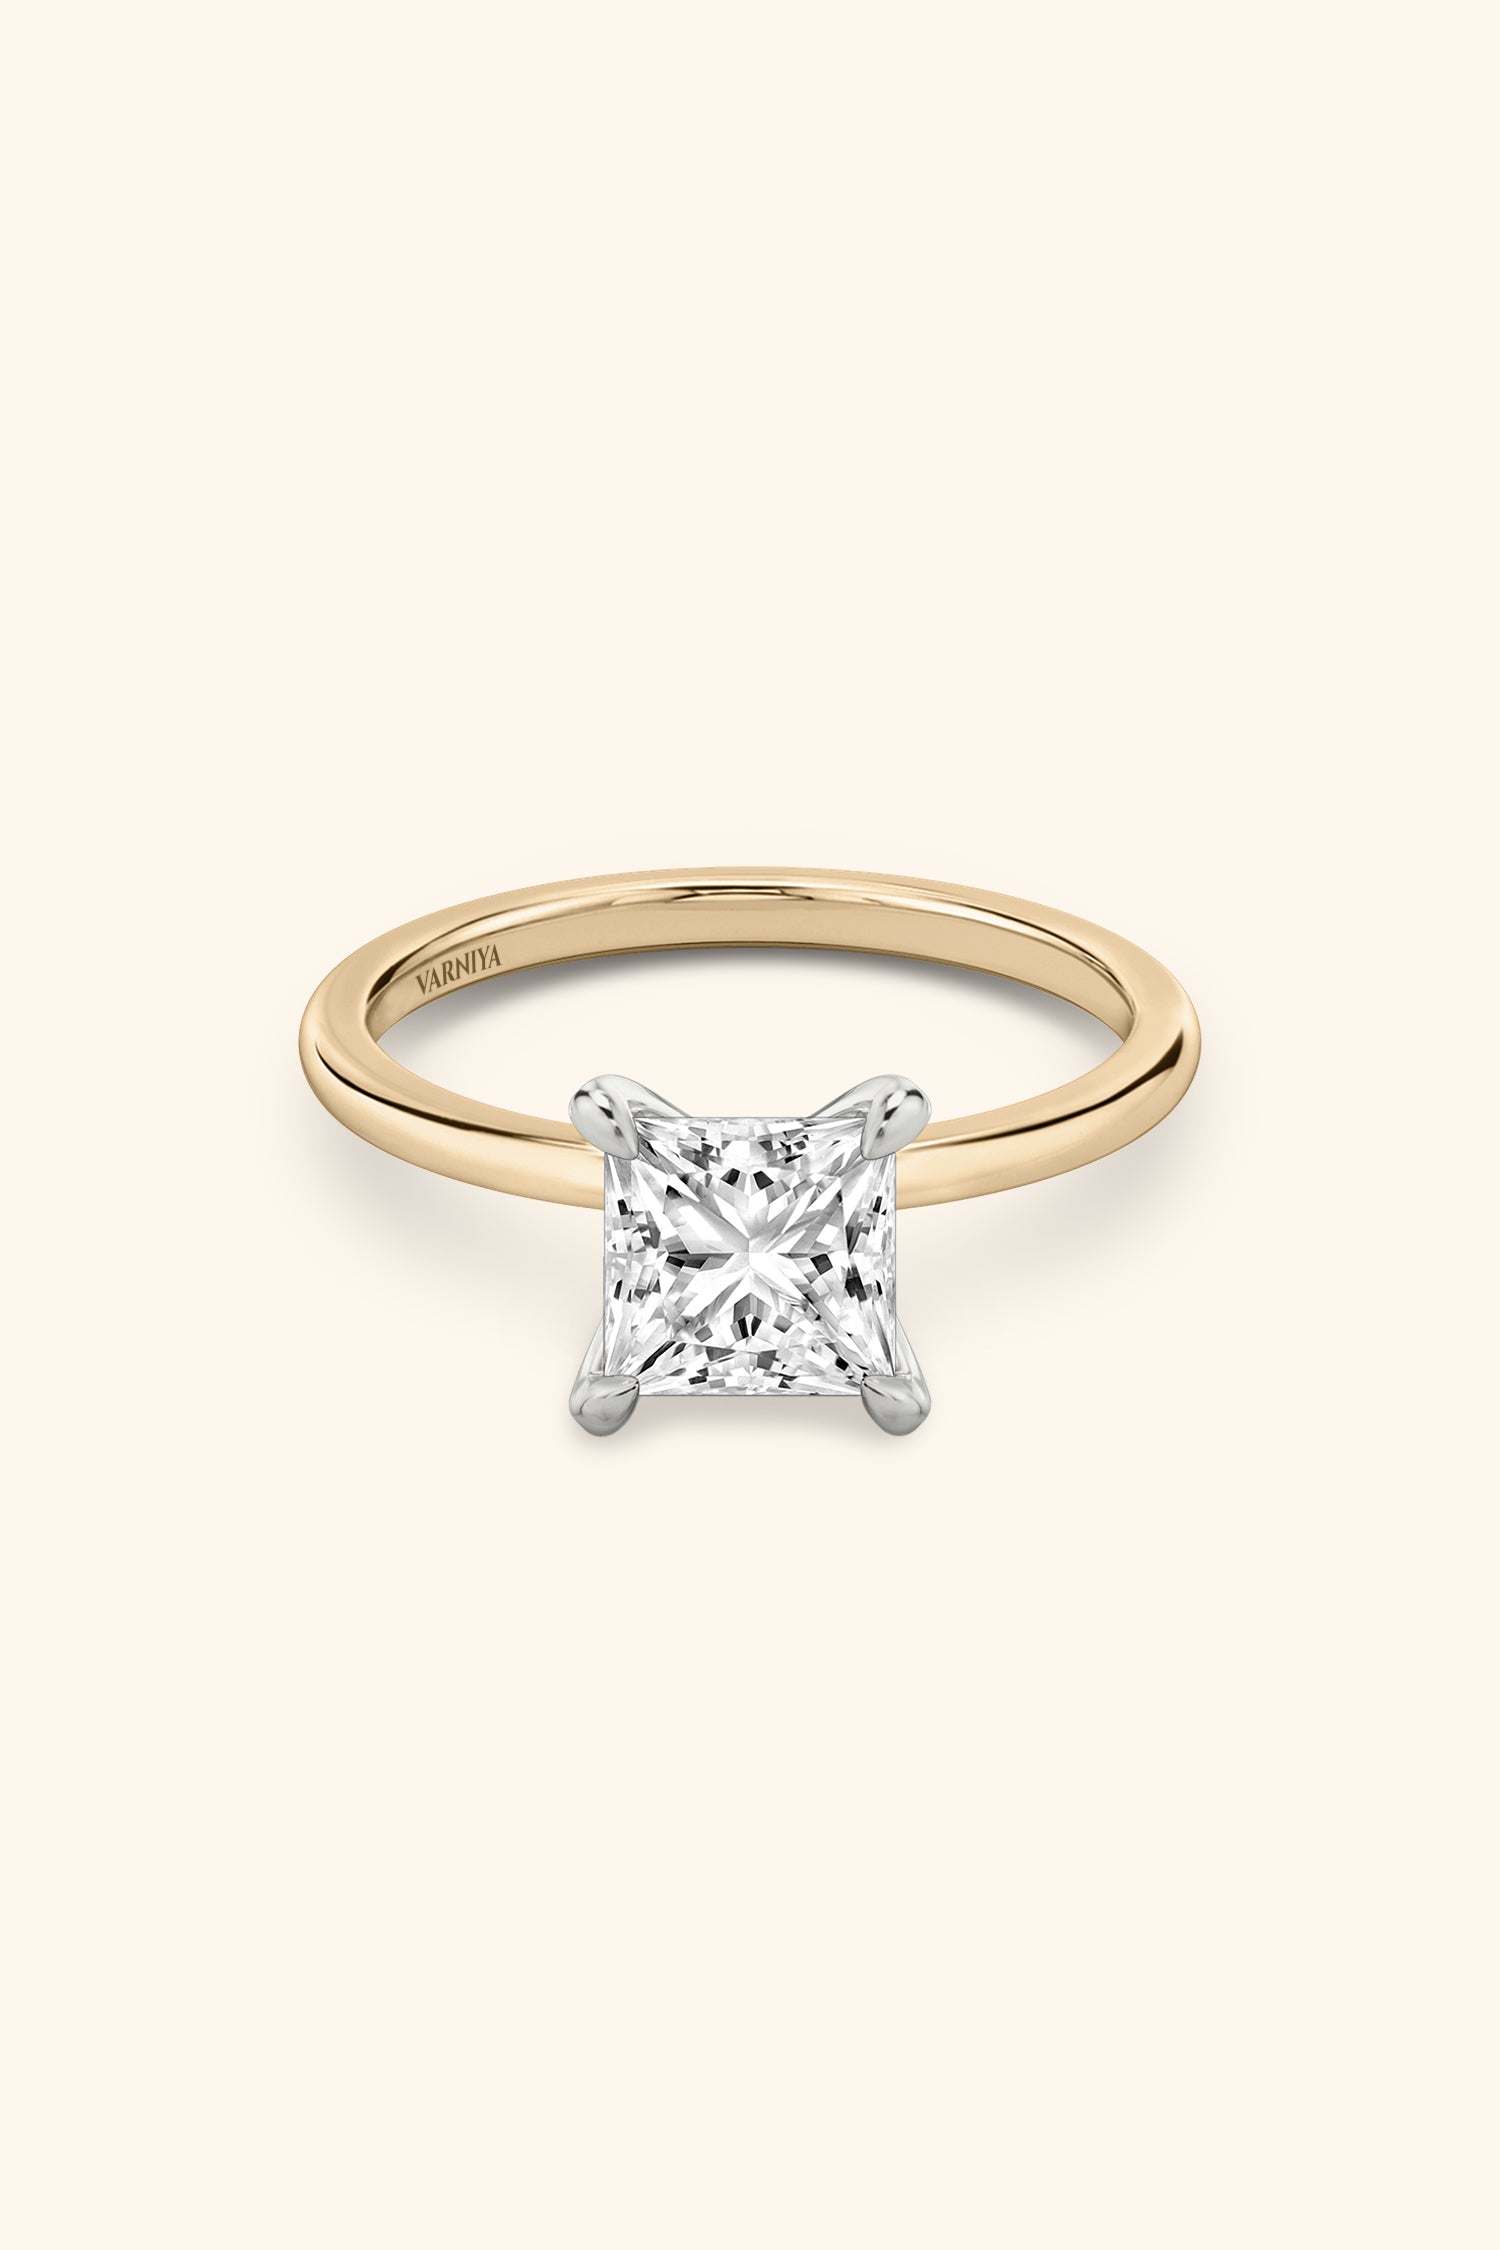 Dual Tone Glance Ring with a Princess Solitaire